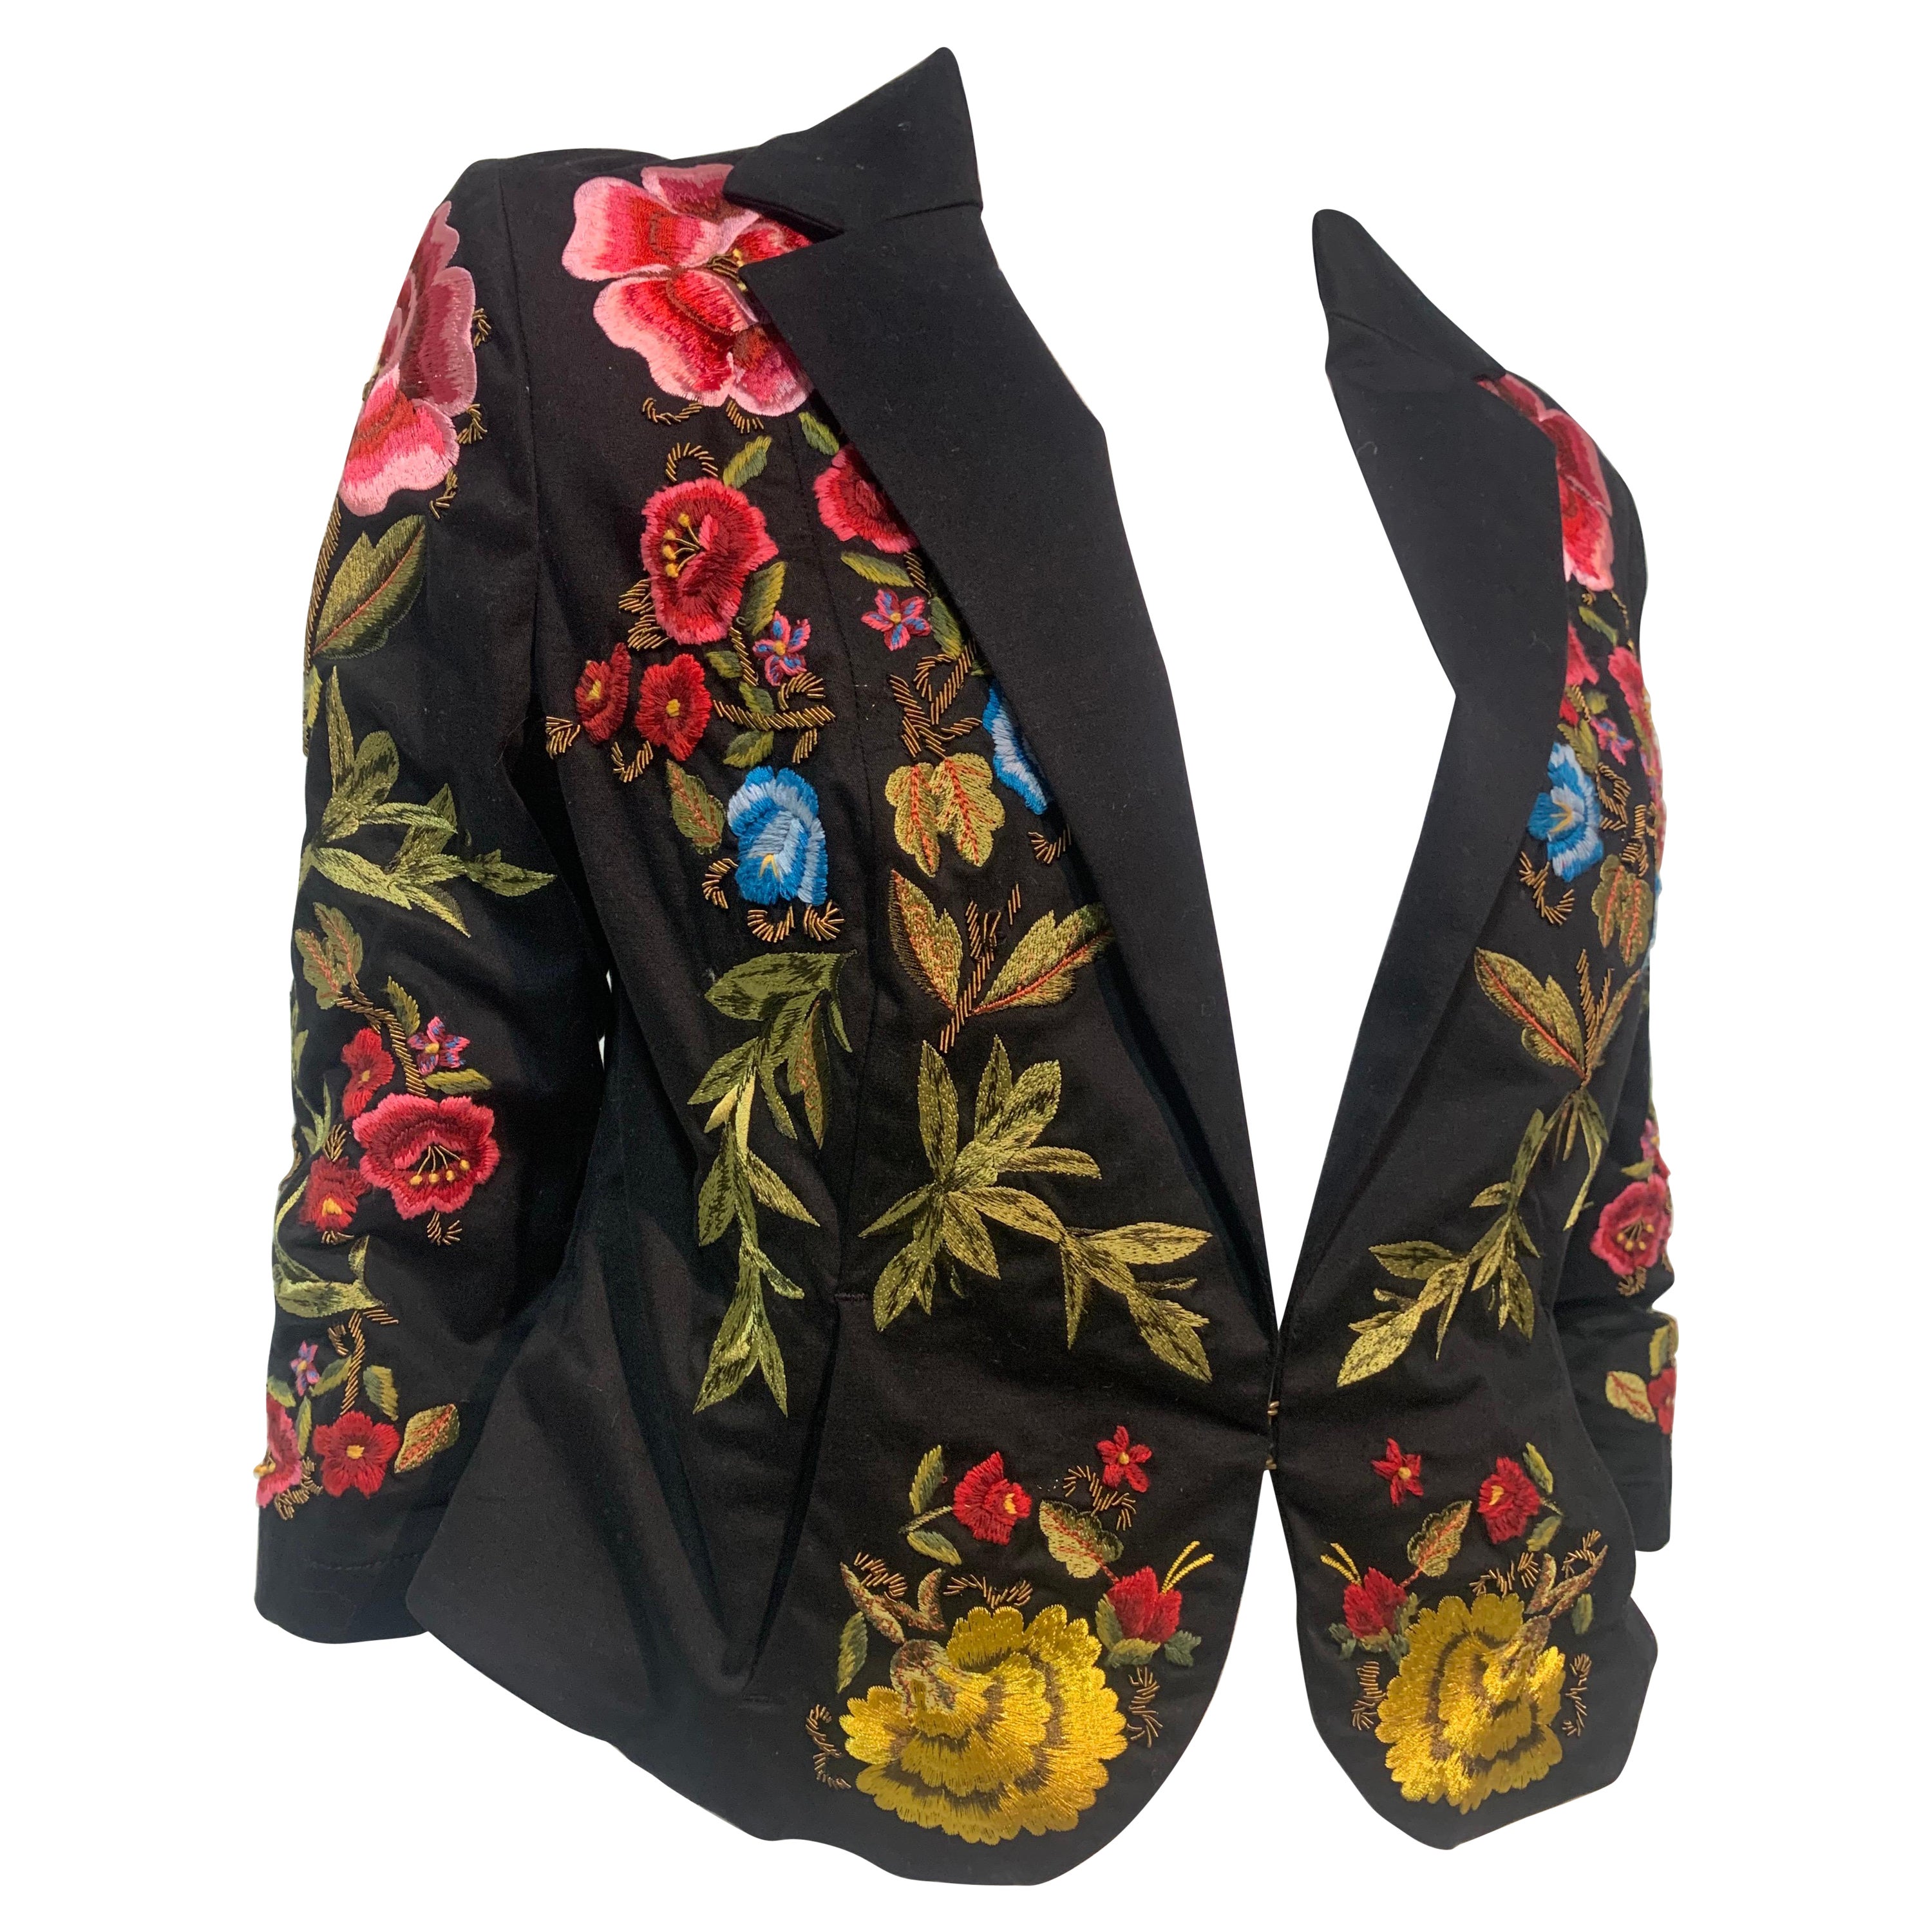 1990s Christian Lacroix Matador-Inspired Black Satin Jacket w/ Floral  Embroidery For Sale at 1stDibs